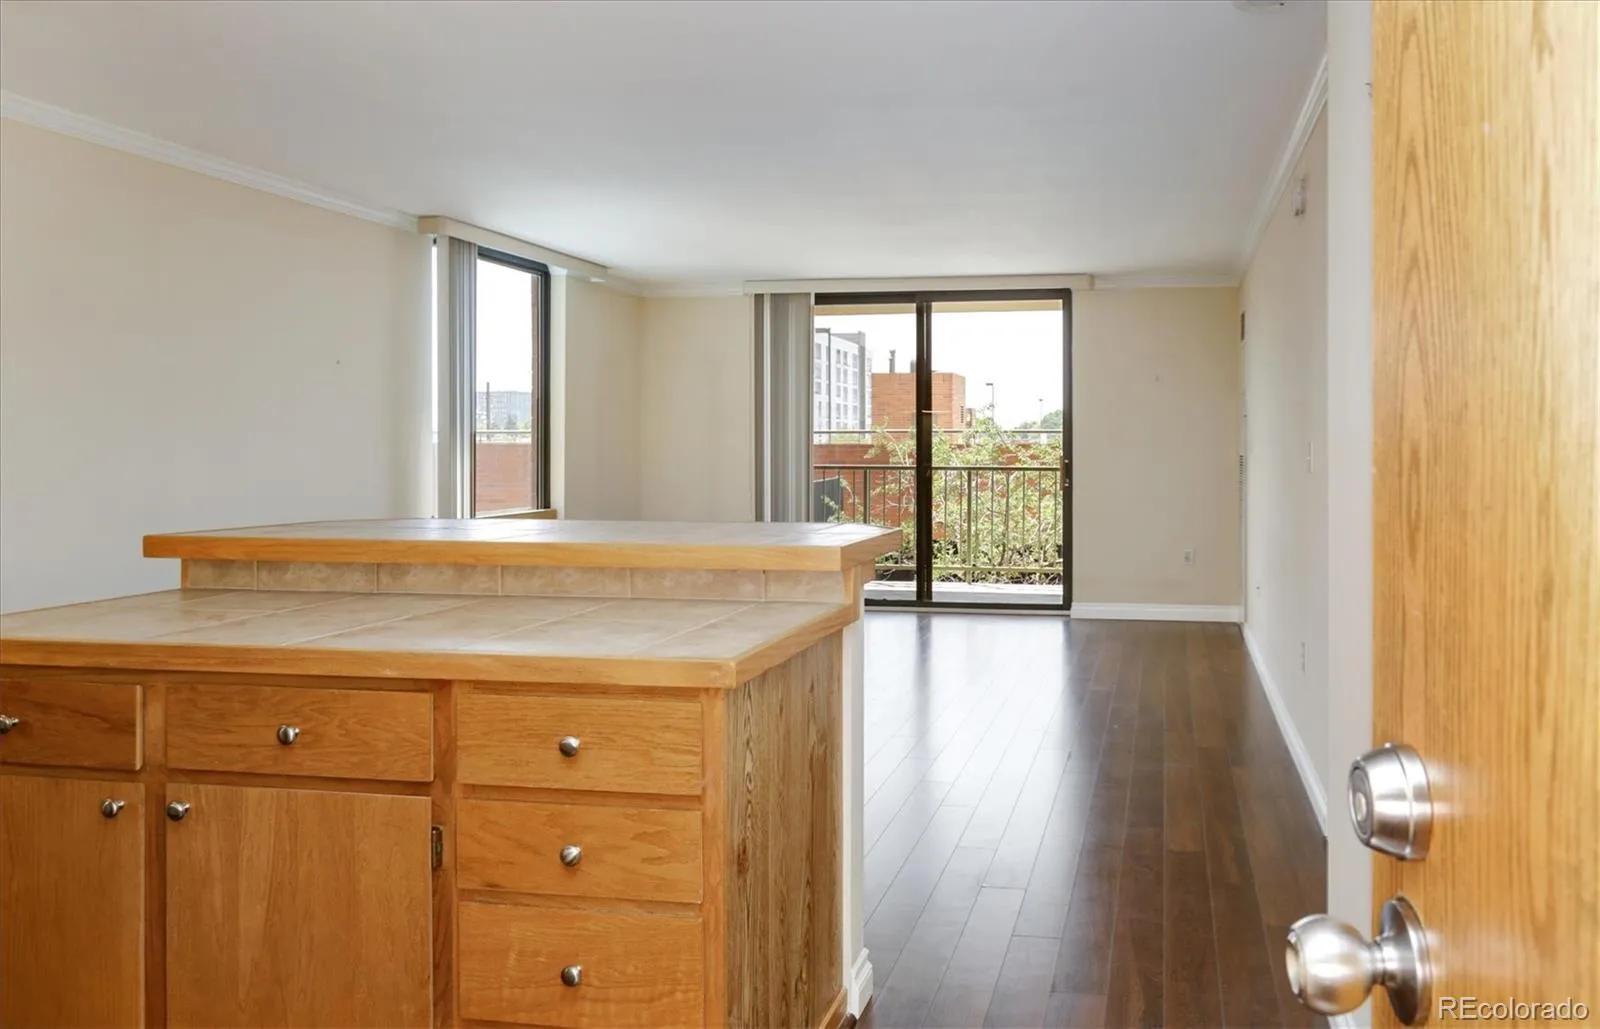 New York City Real Estate | View 1301 Speer Boulevard 301 | Photo4 | View 4